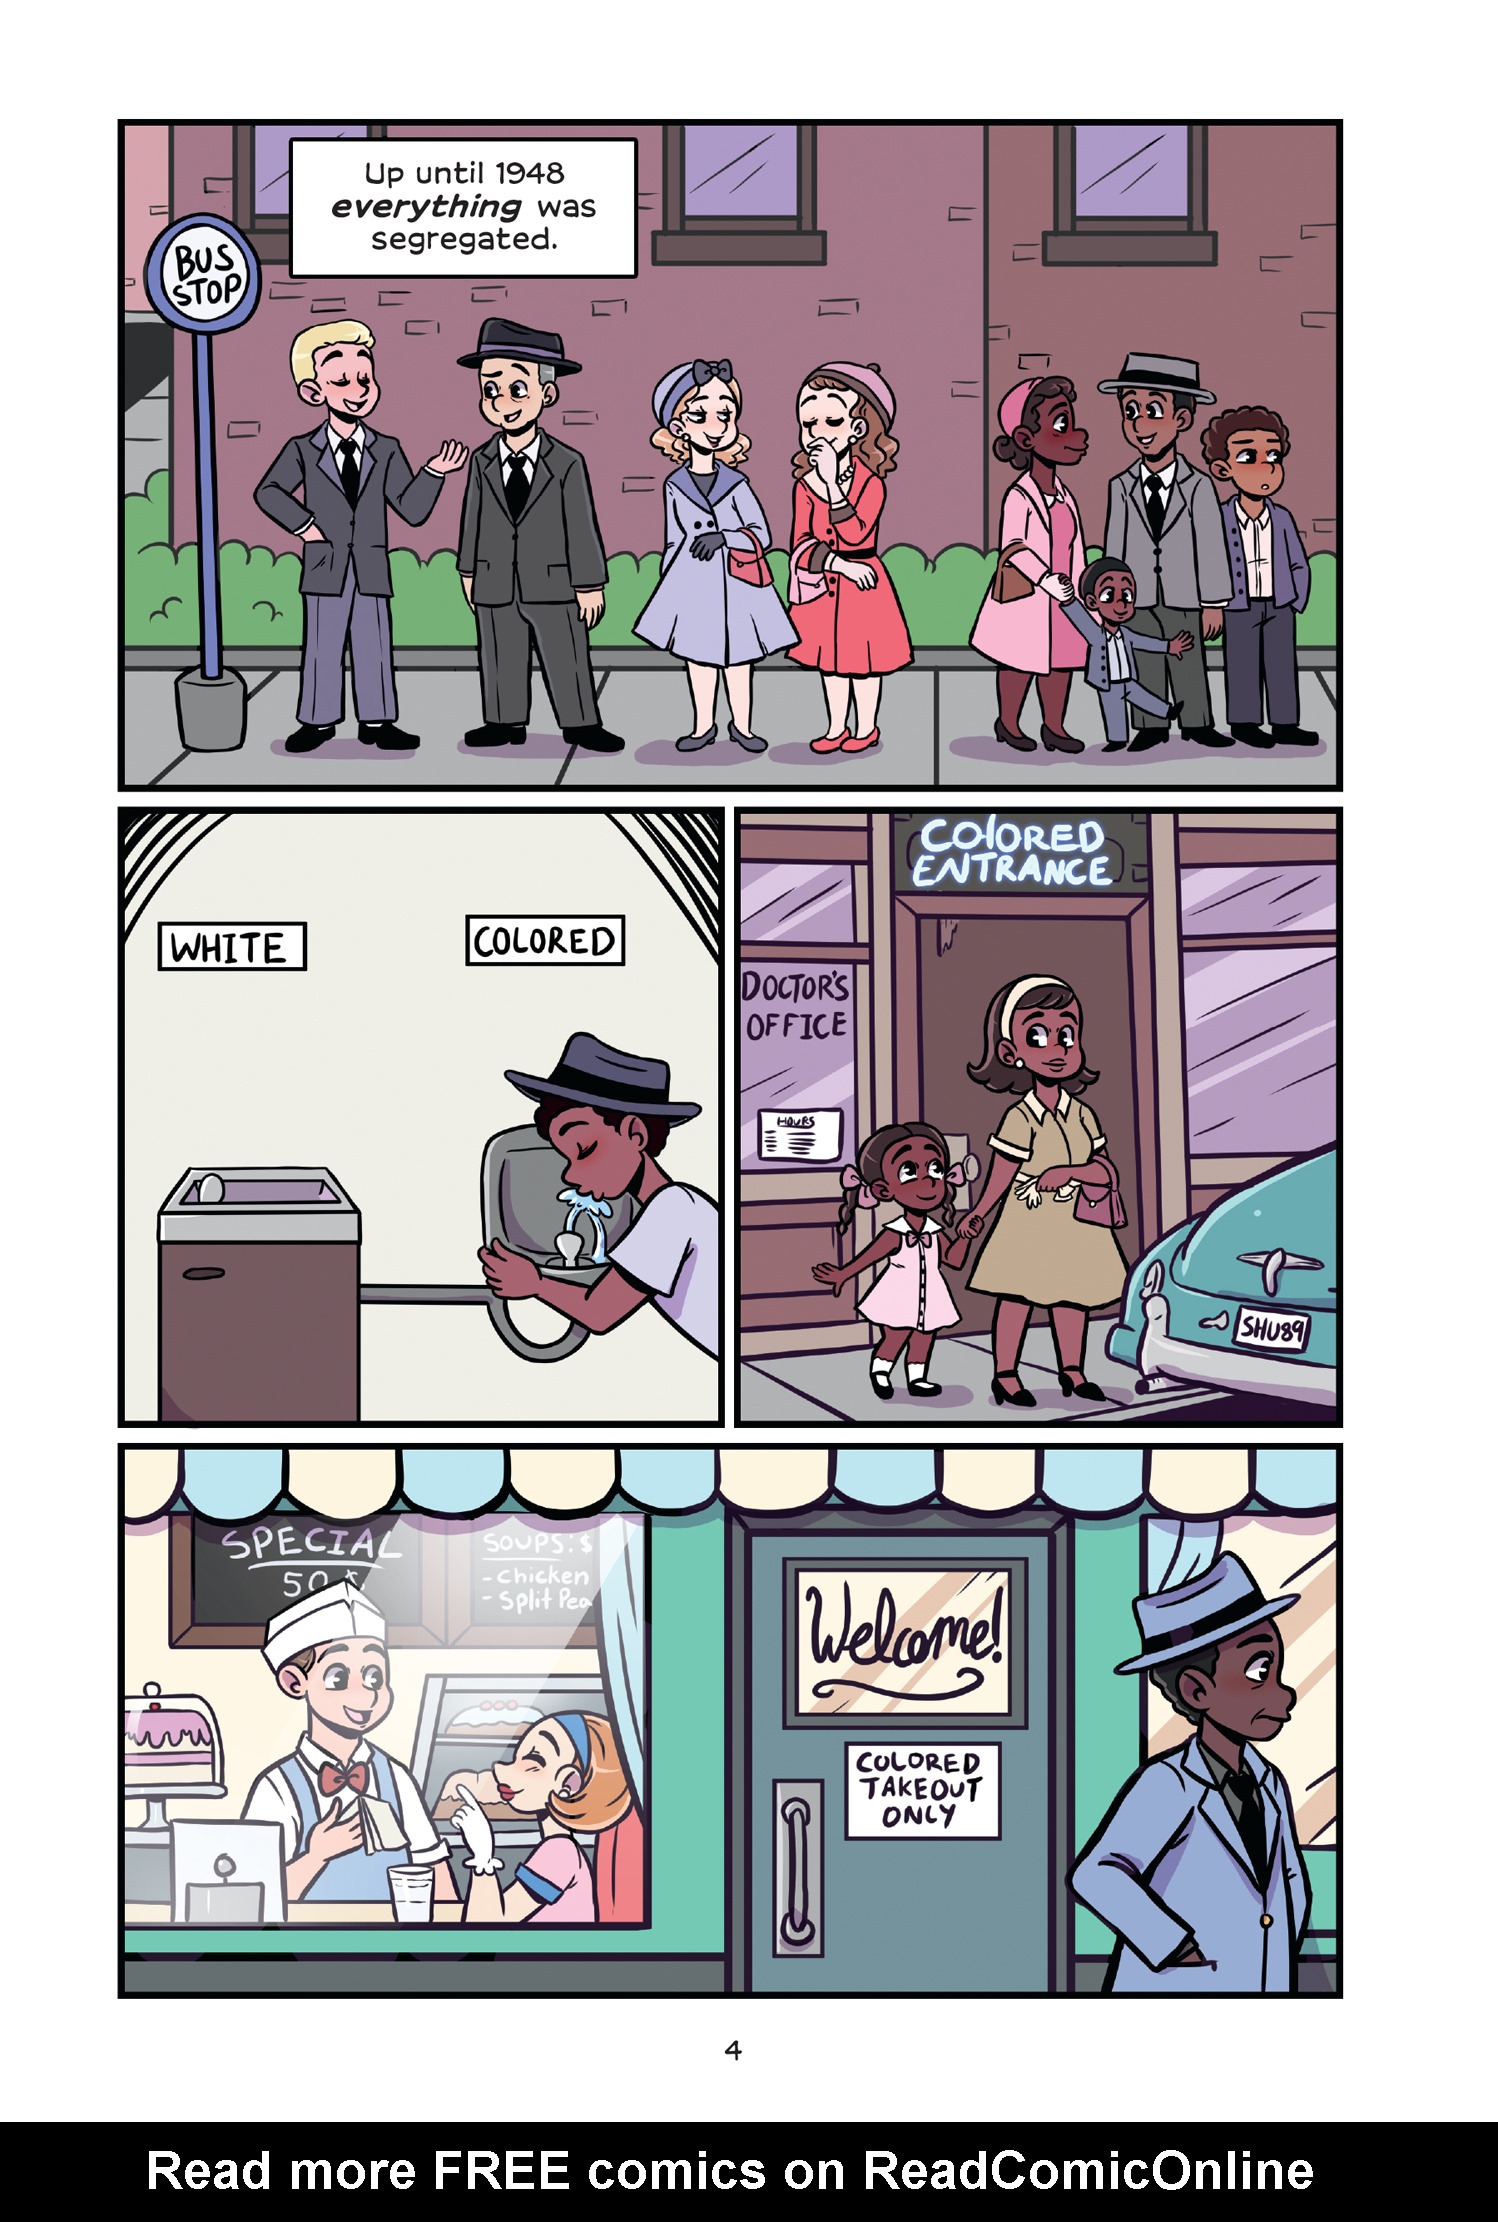 Read online History Comics comic -  Issue # Rosa Parks & Claudette Colvin - Civil Rights Heroes - 10